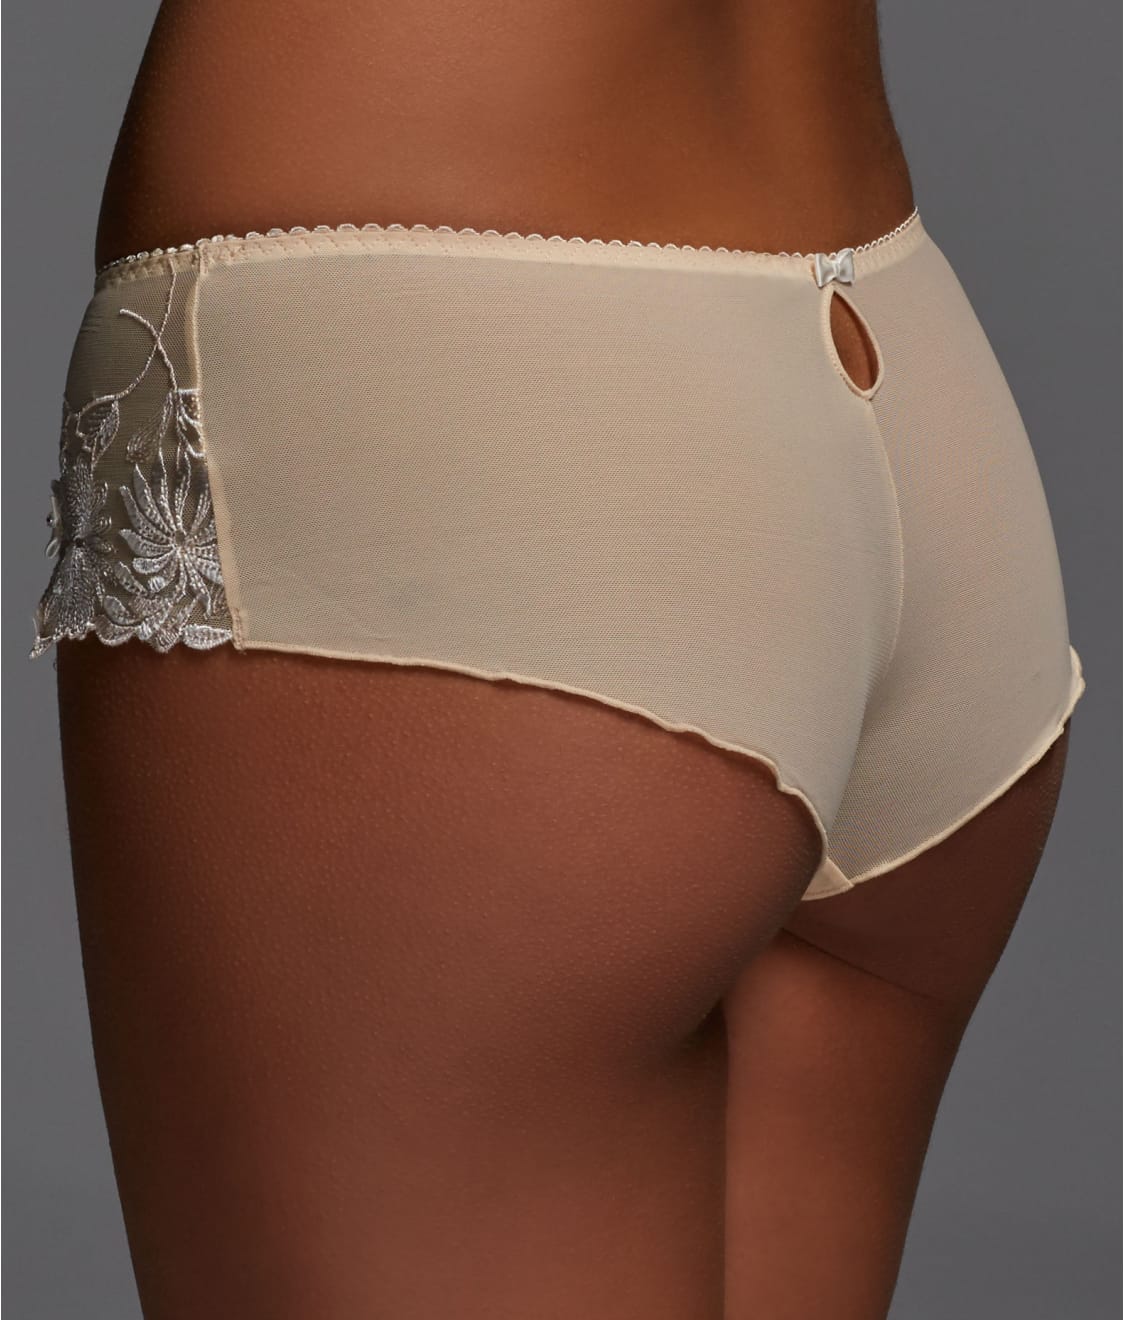 Pour Moi St Tropez Shorty Brief 7703 Womens Knickers White//Apricot